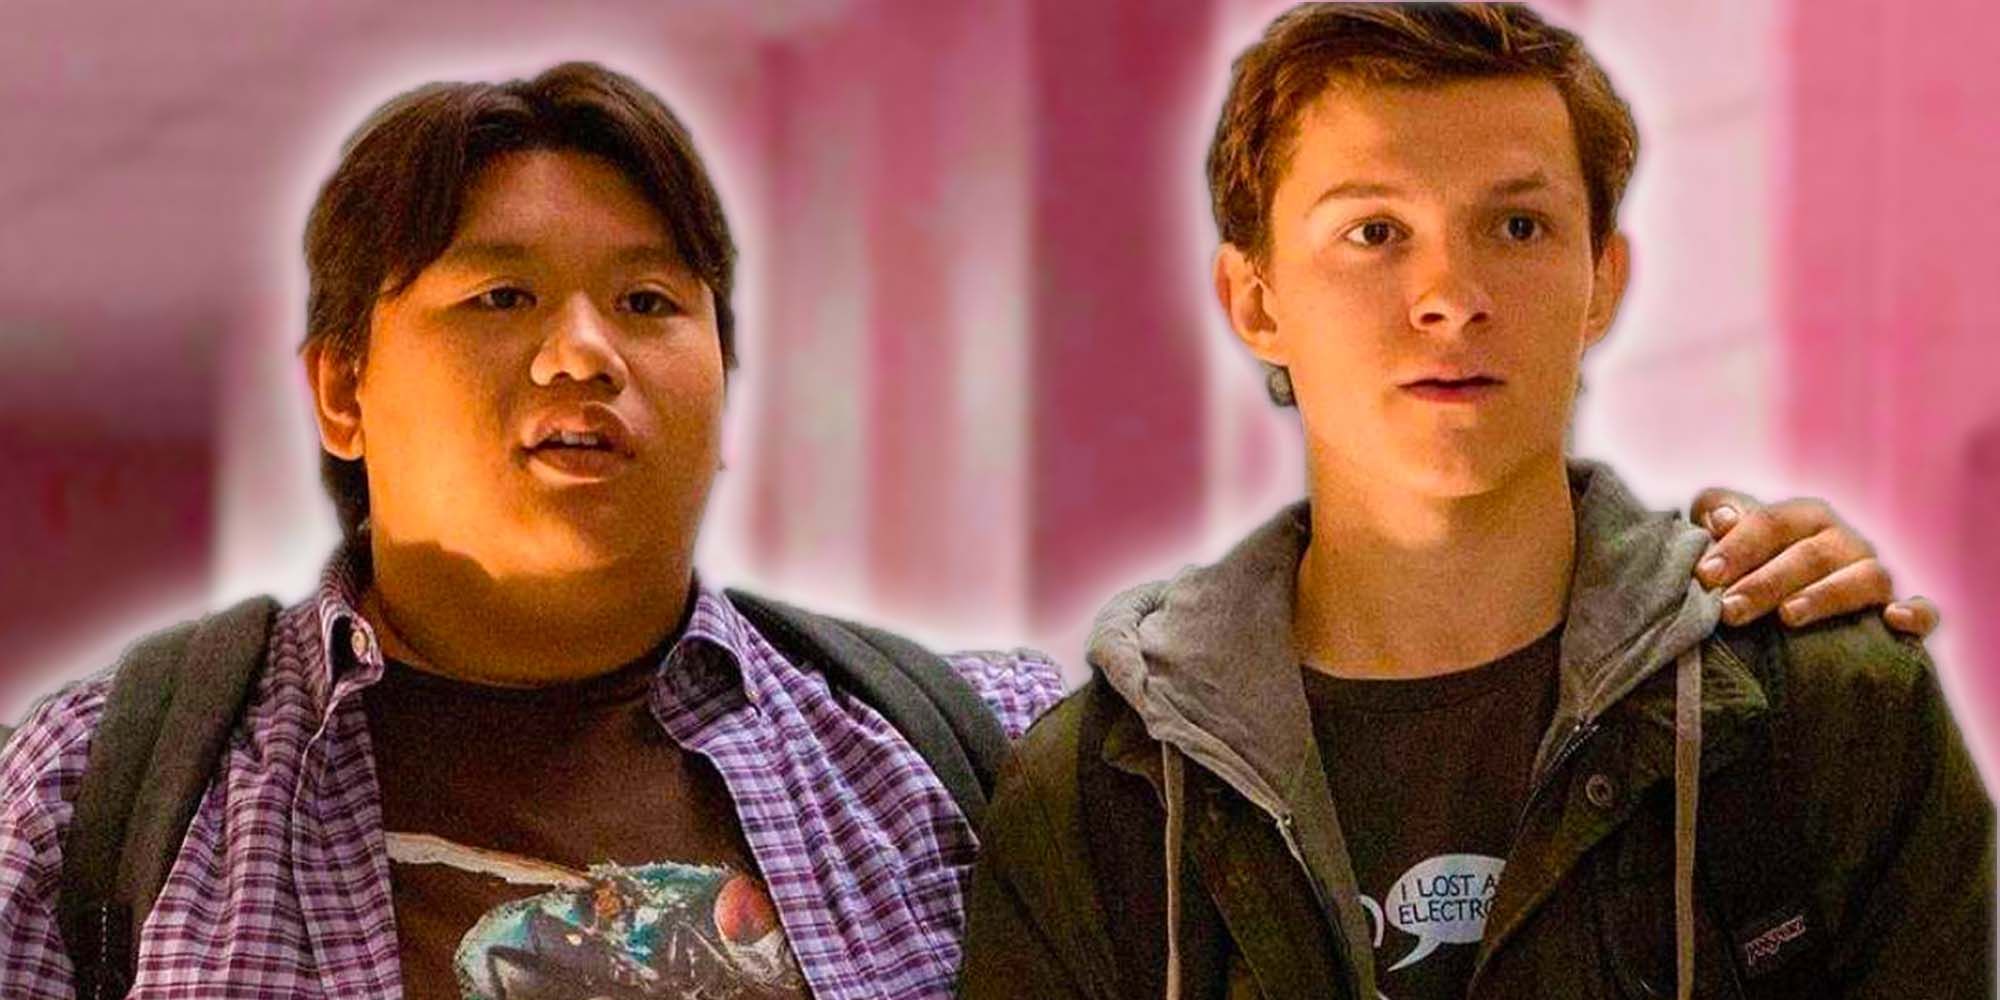 Ned Leeds and Peter Parker in Spider-Man: No Way Home